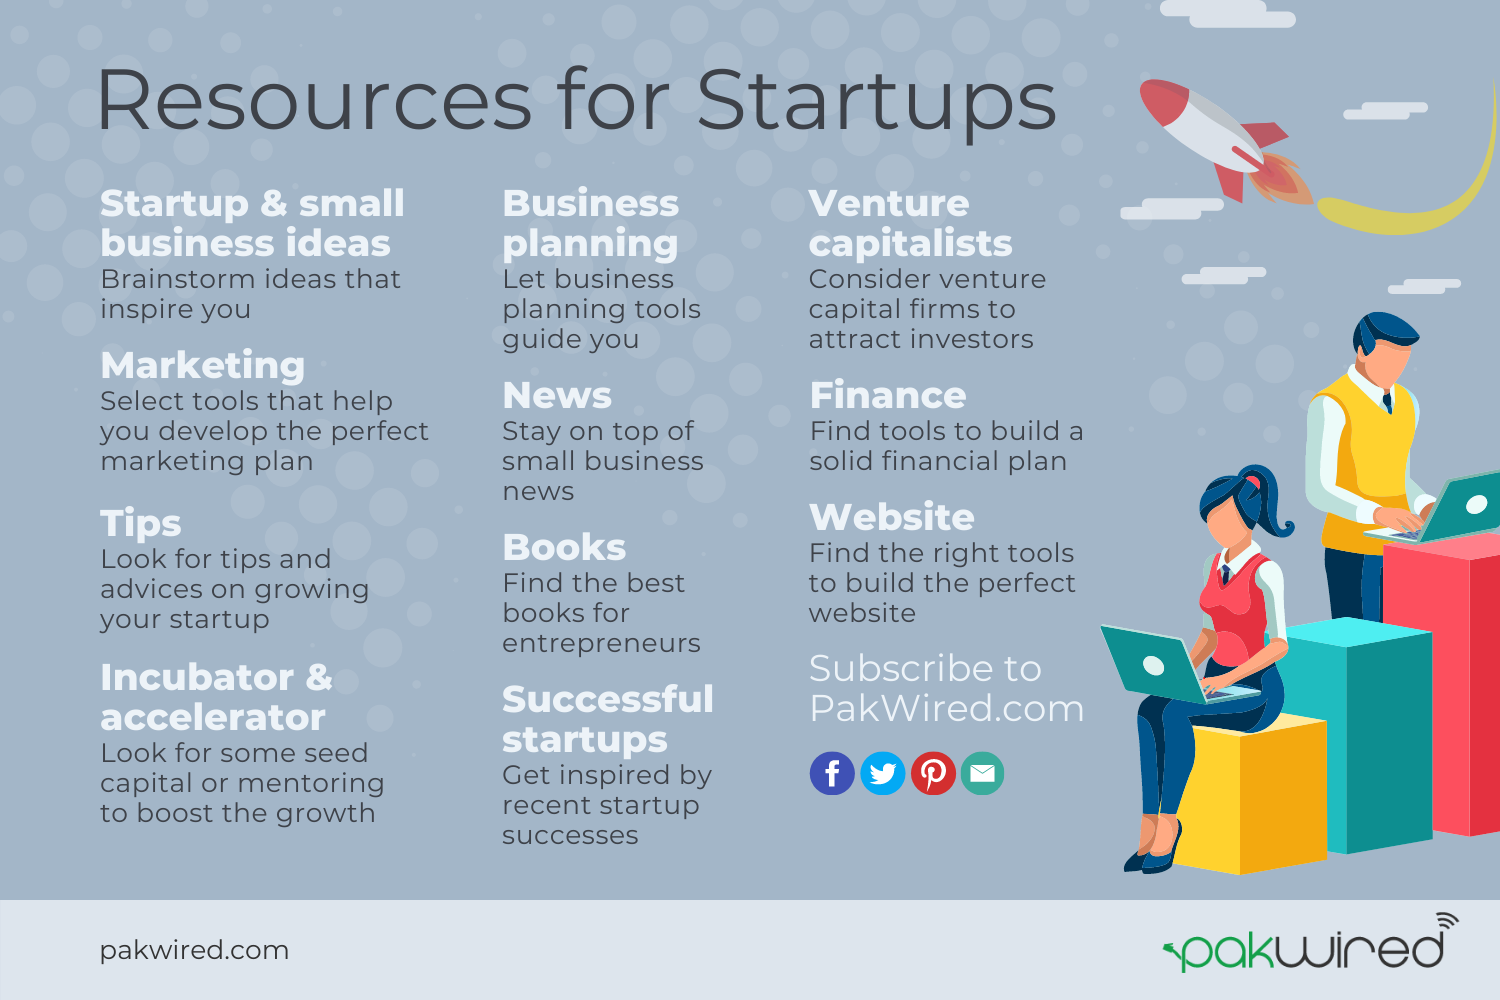 Resources for Startups